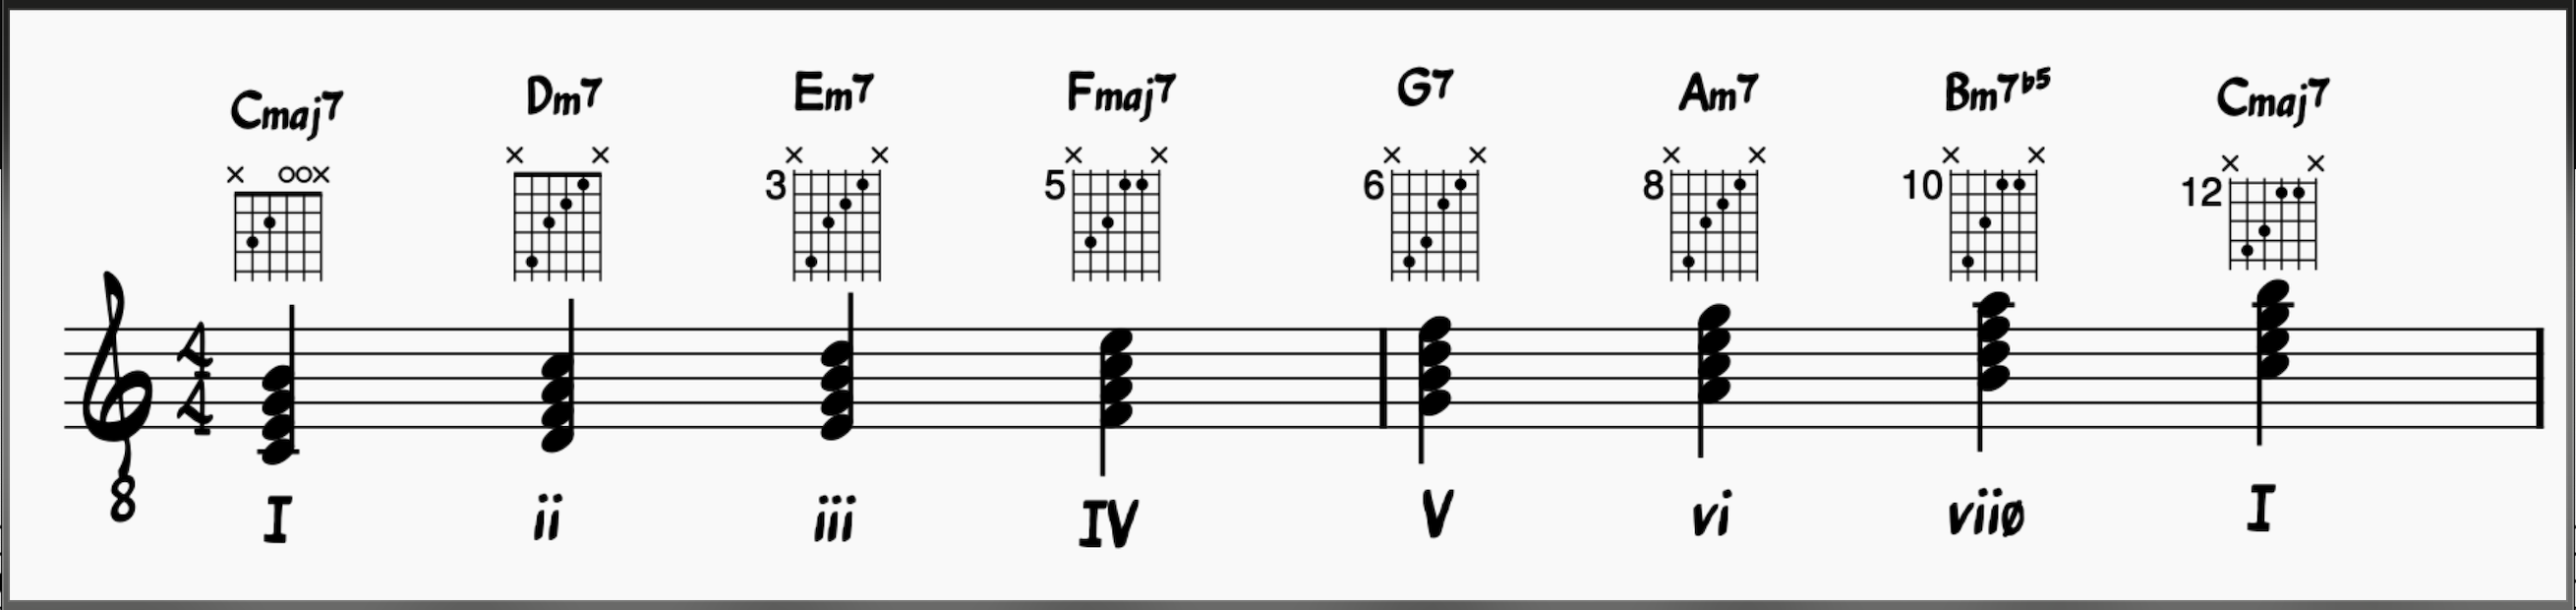 Jazz Guitar: Diatonic 7th chords in the Key of C major